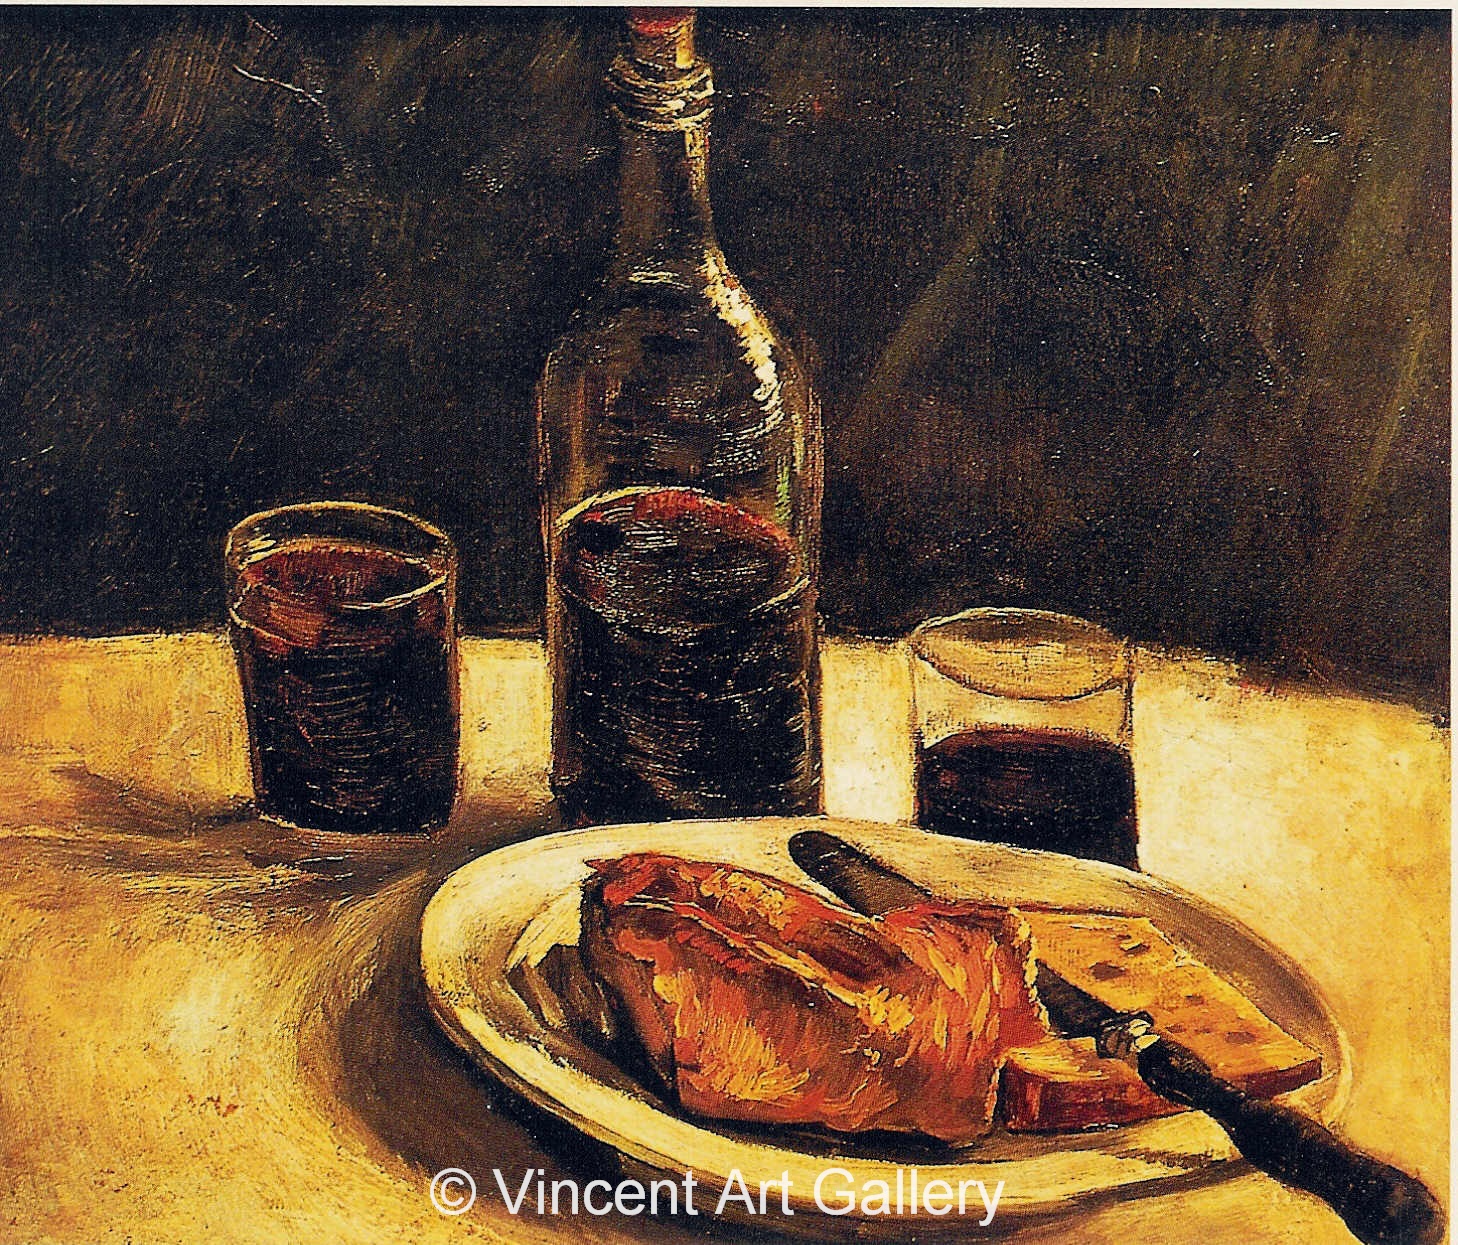 JH1121, Still Life with Bottle, Two Glasses, Cheese and Bread